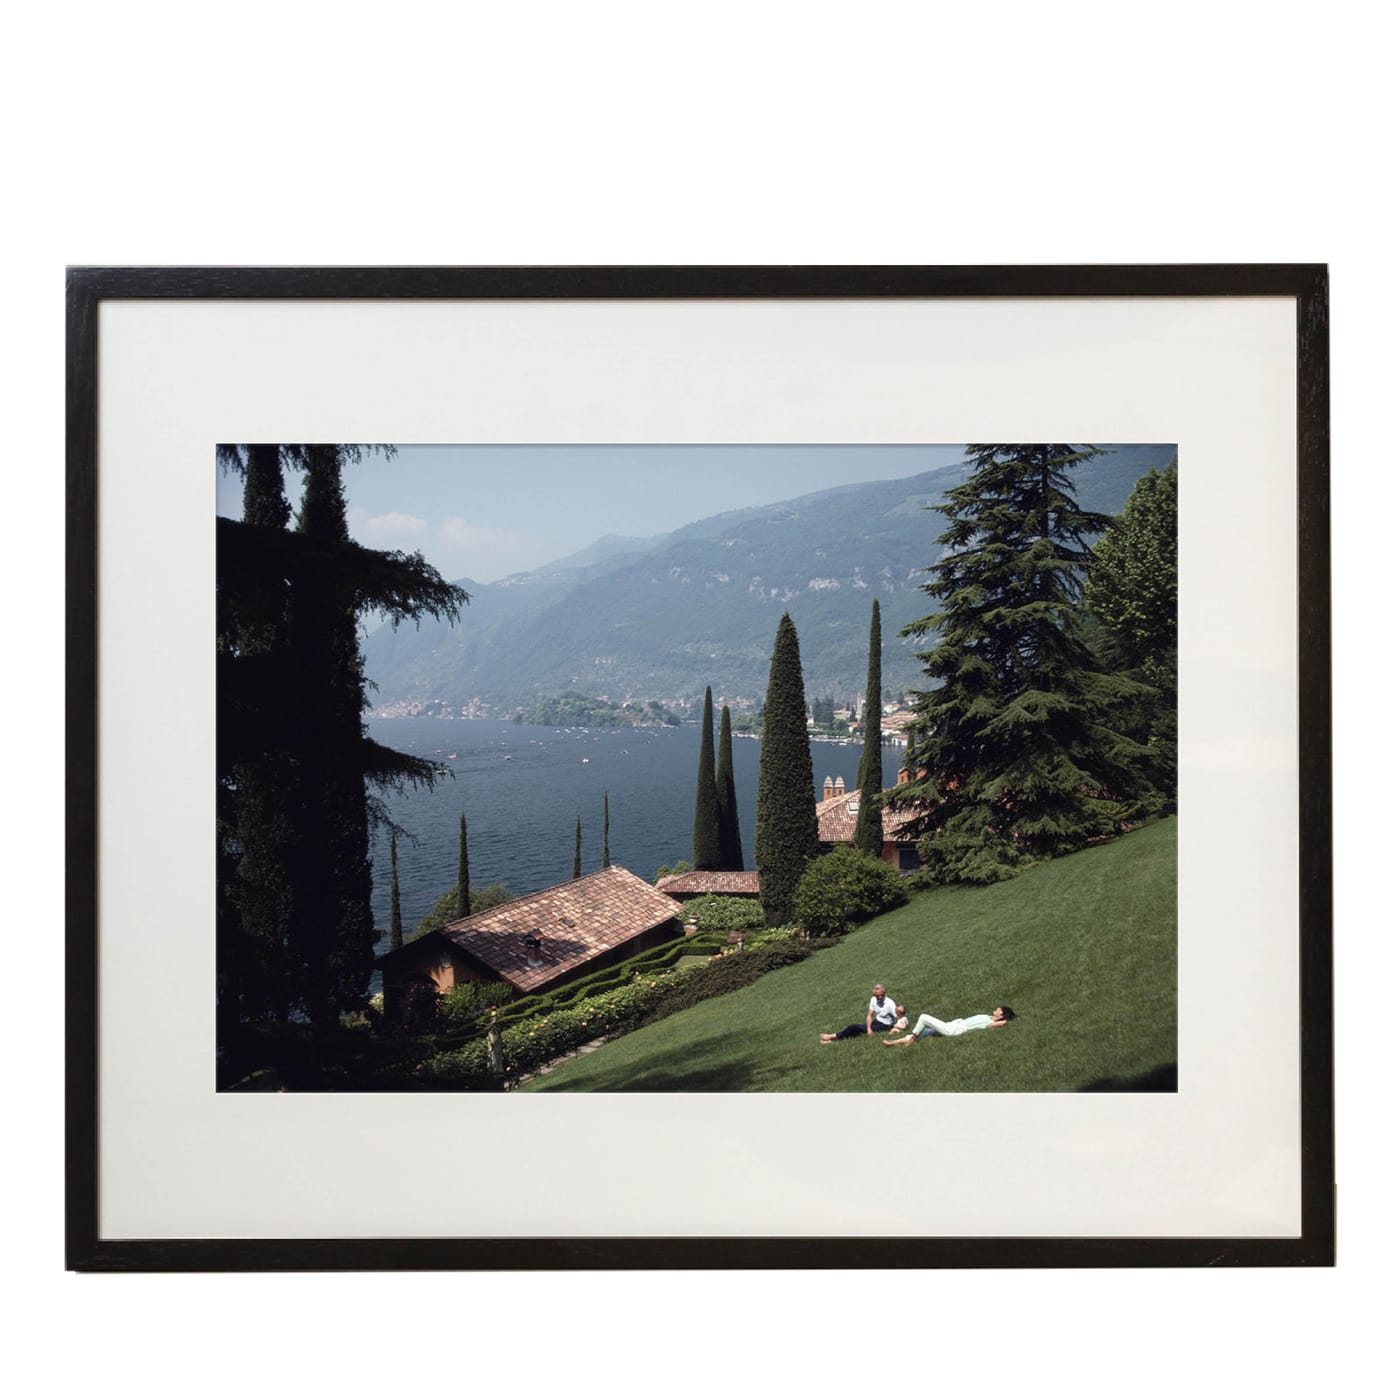 At Home With The Montegazzas Small Framed Print - Getty Images